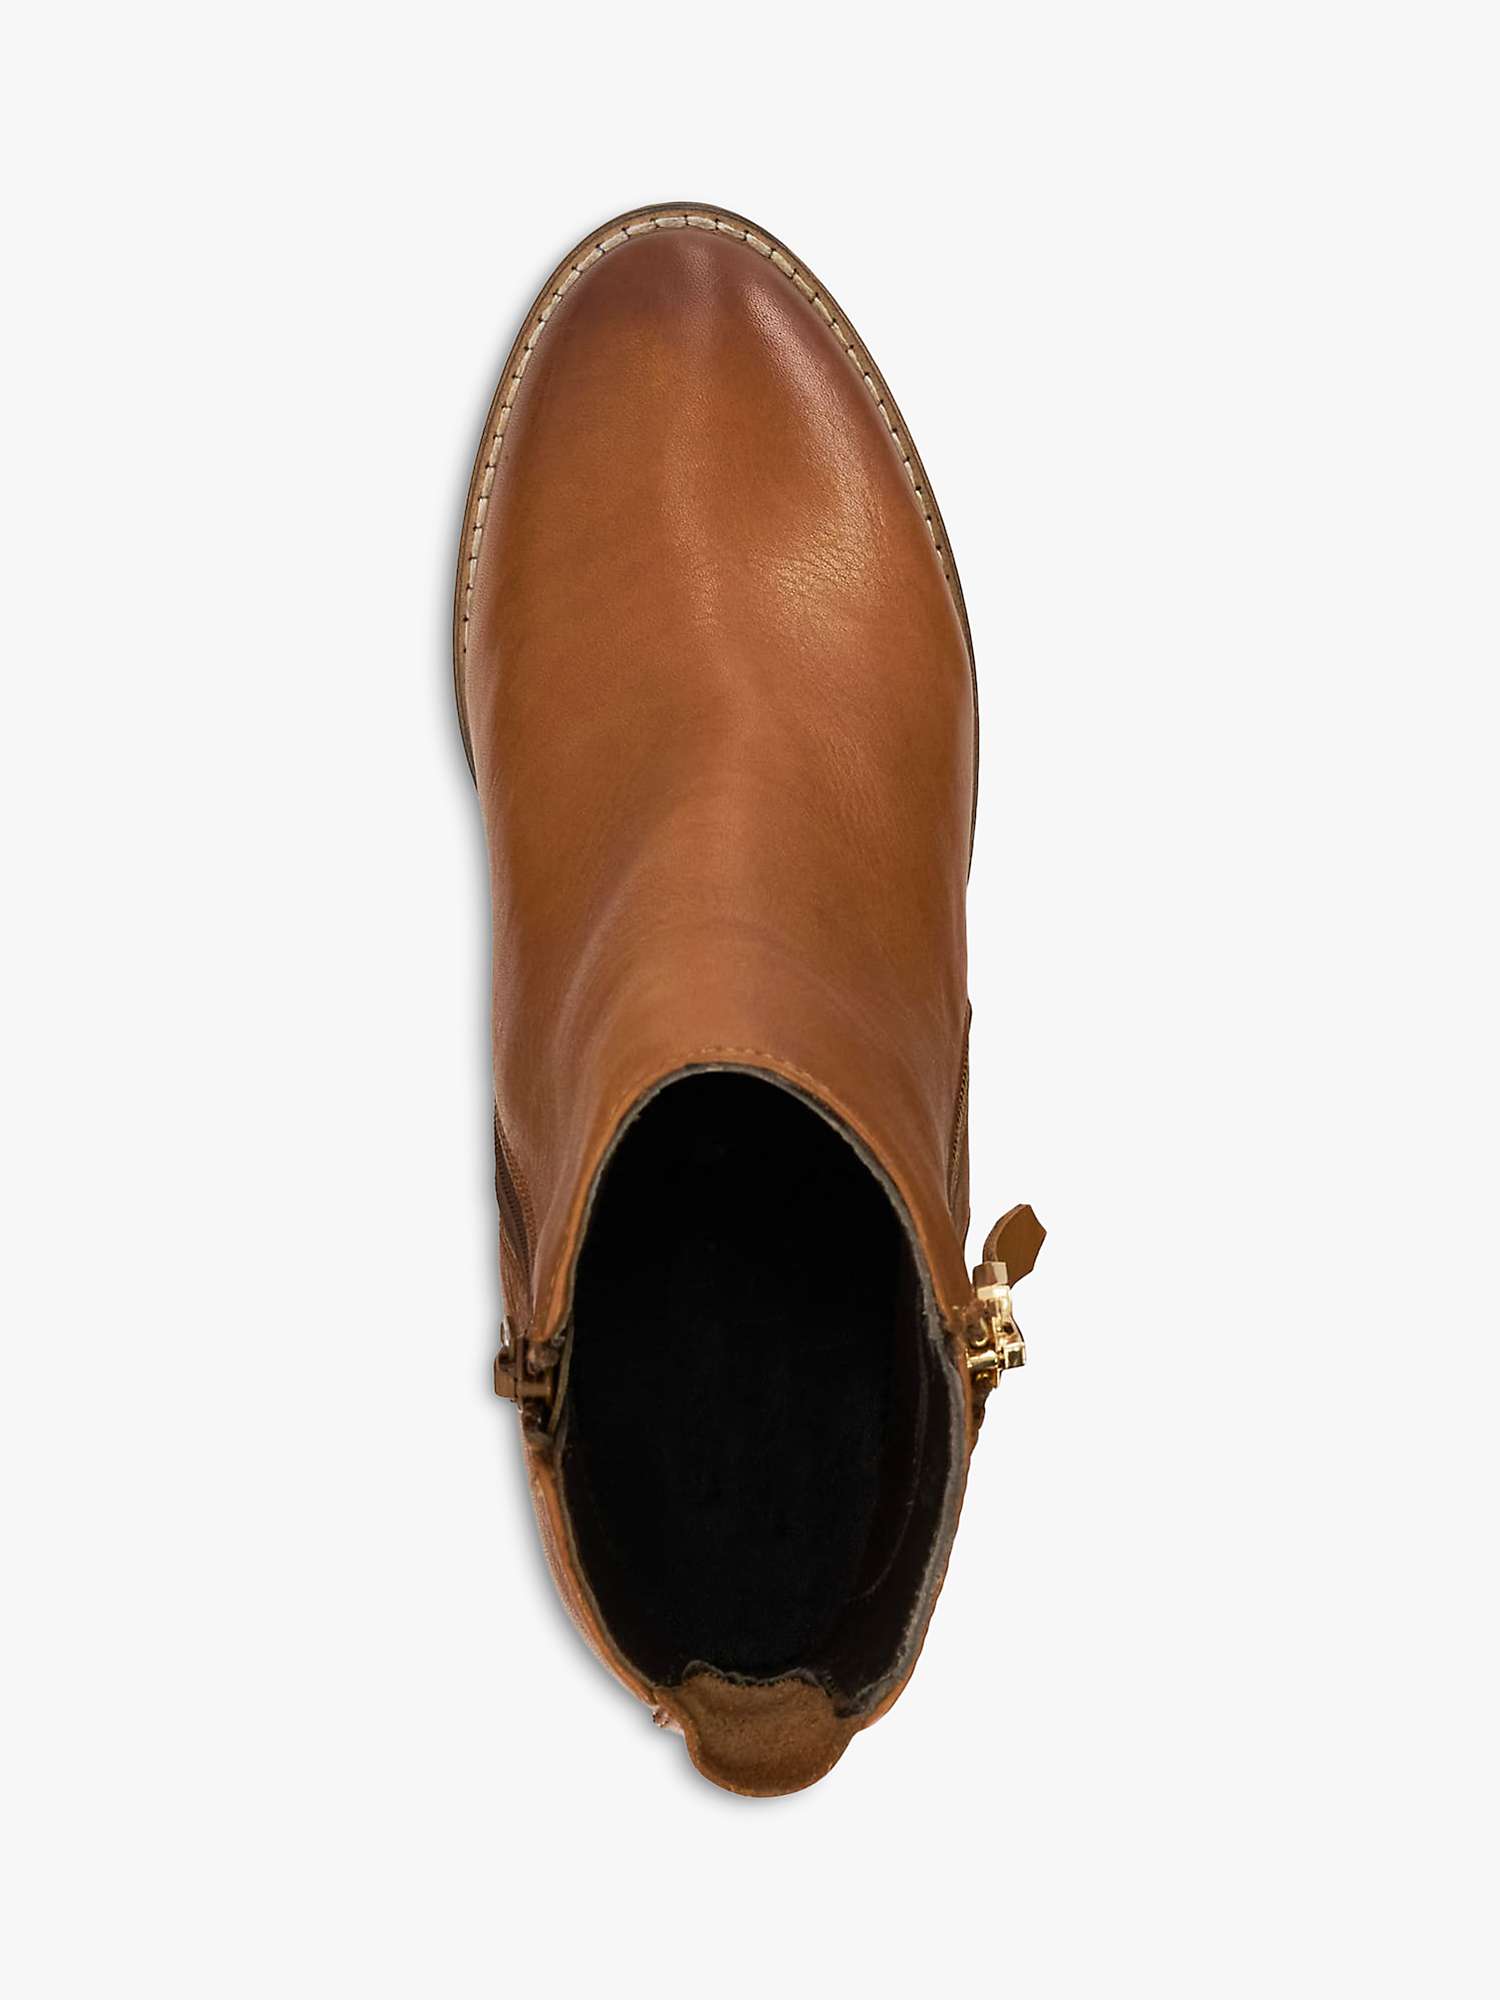 Buy Dune Paicey Leather Ankle Boots Online at johnlewis.com